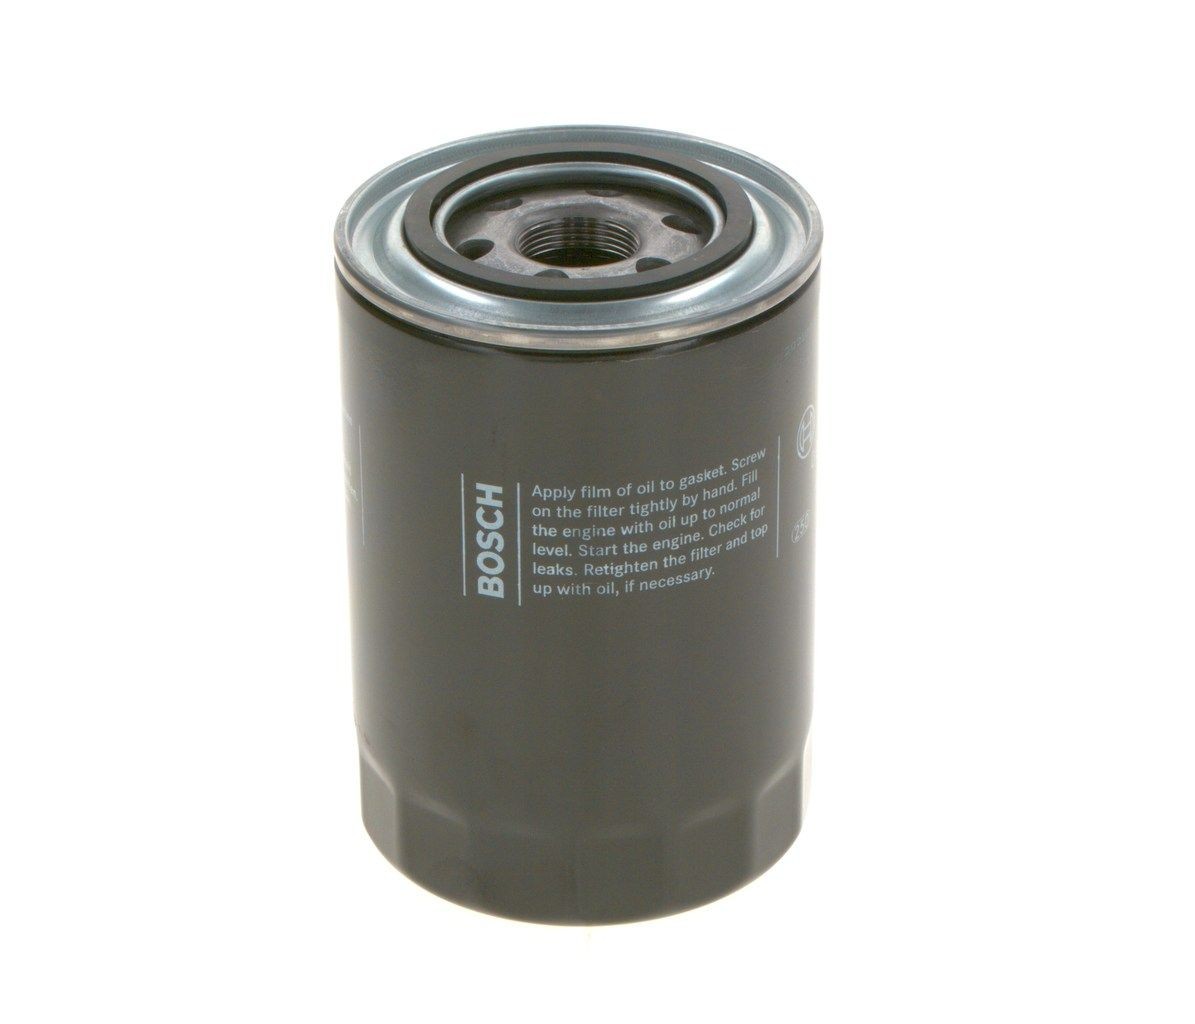 09864B7036 Oil filter PM 036 BOSCH M 26 x 1,5, Spin-on Filter